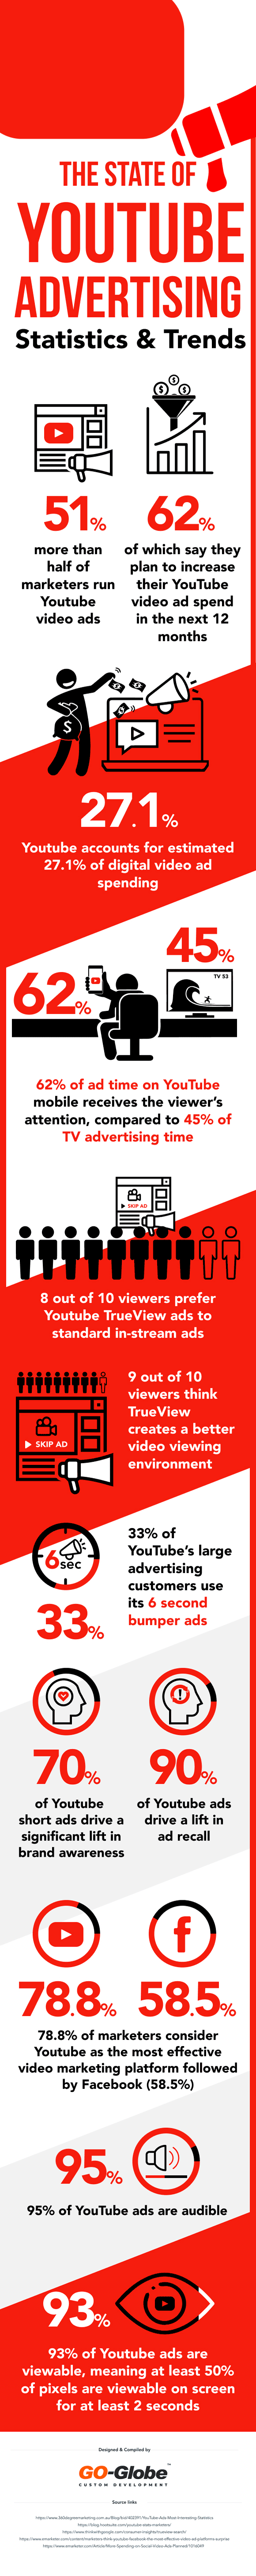 The State of Youtube Advertising - Statistics and Trends